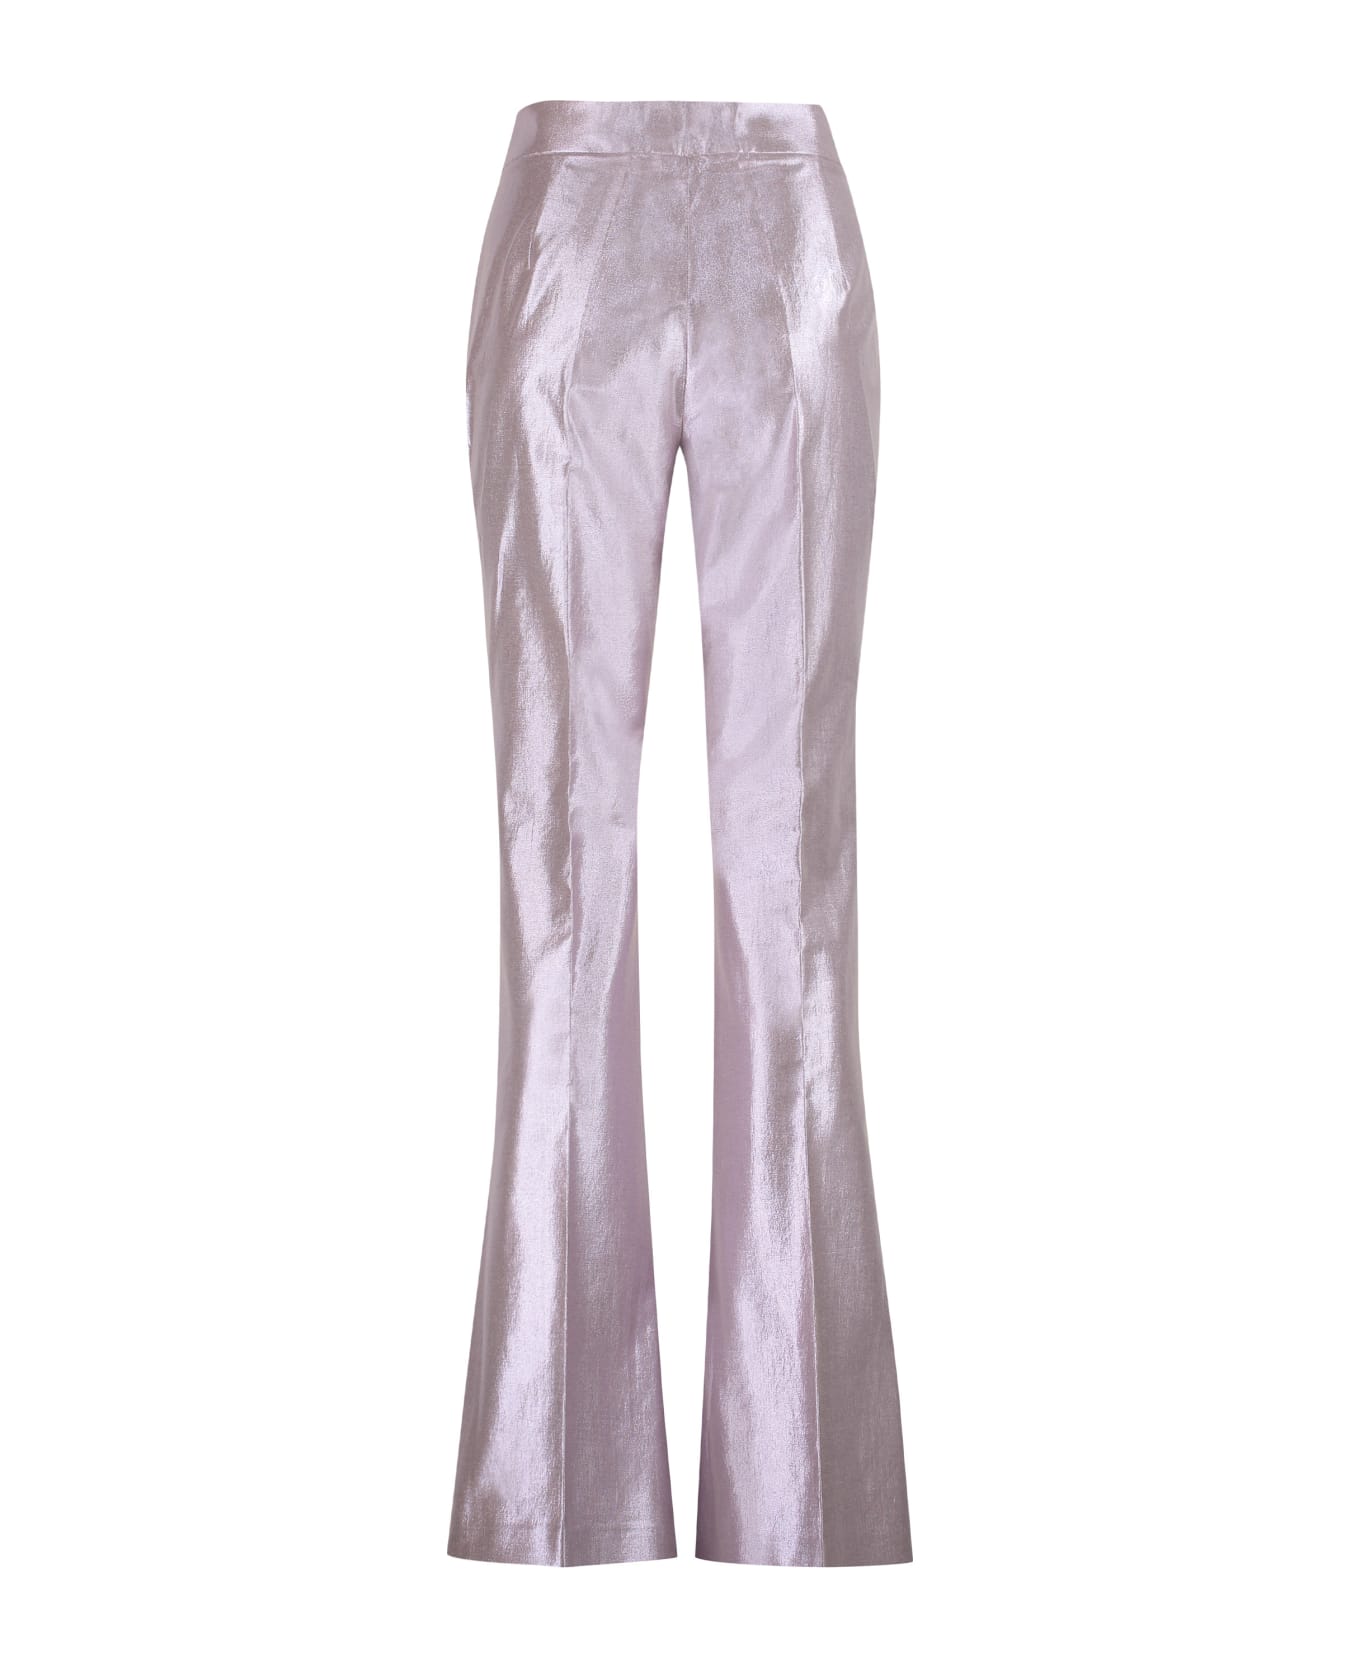 Genny Lurex Cotton Trousers - Lilac ボトムス